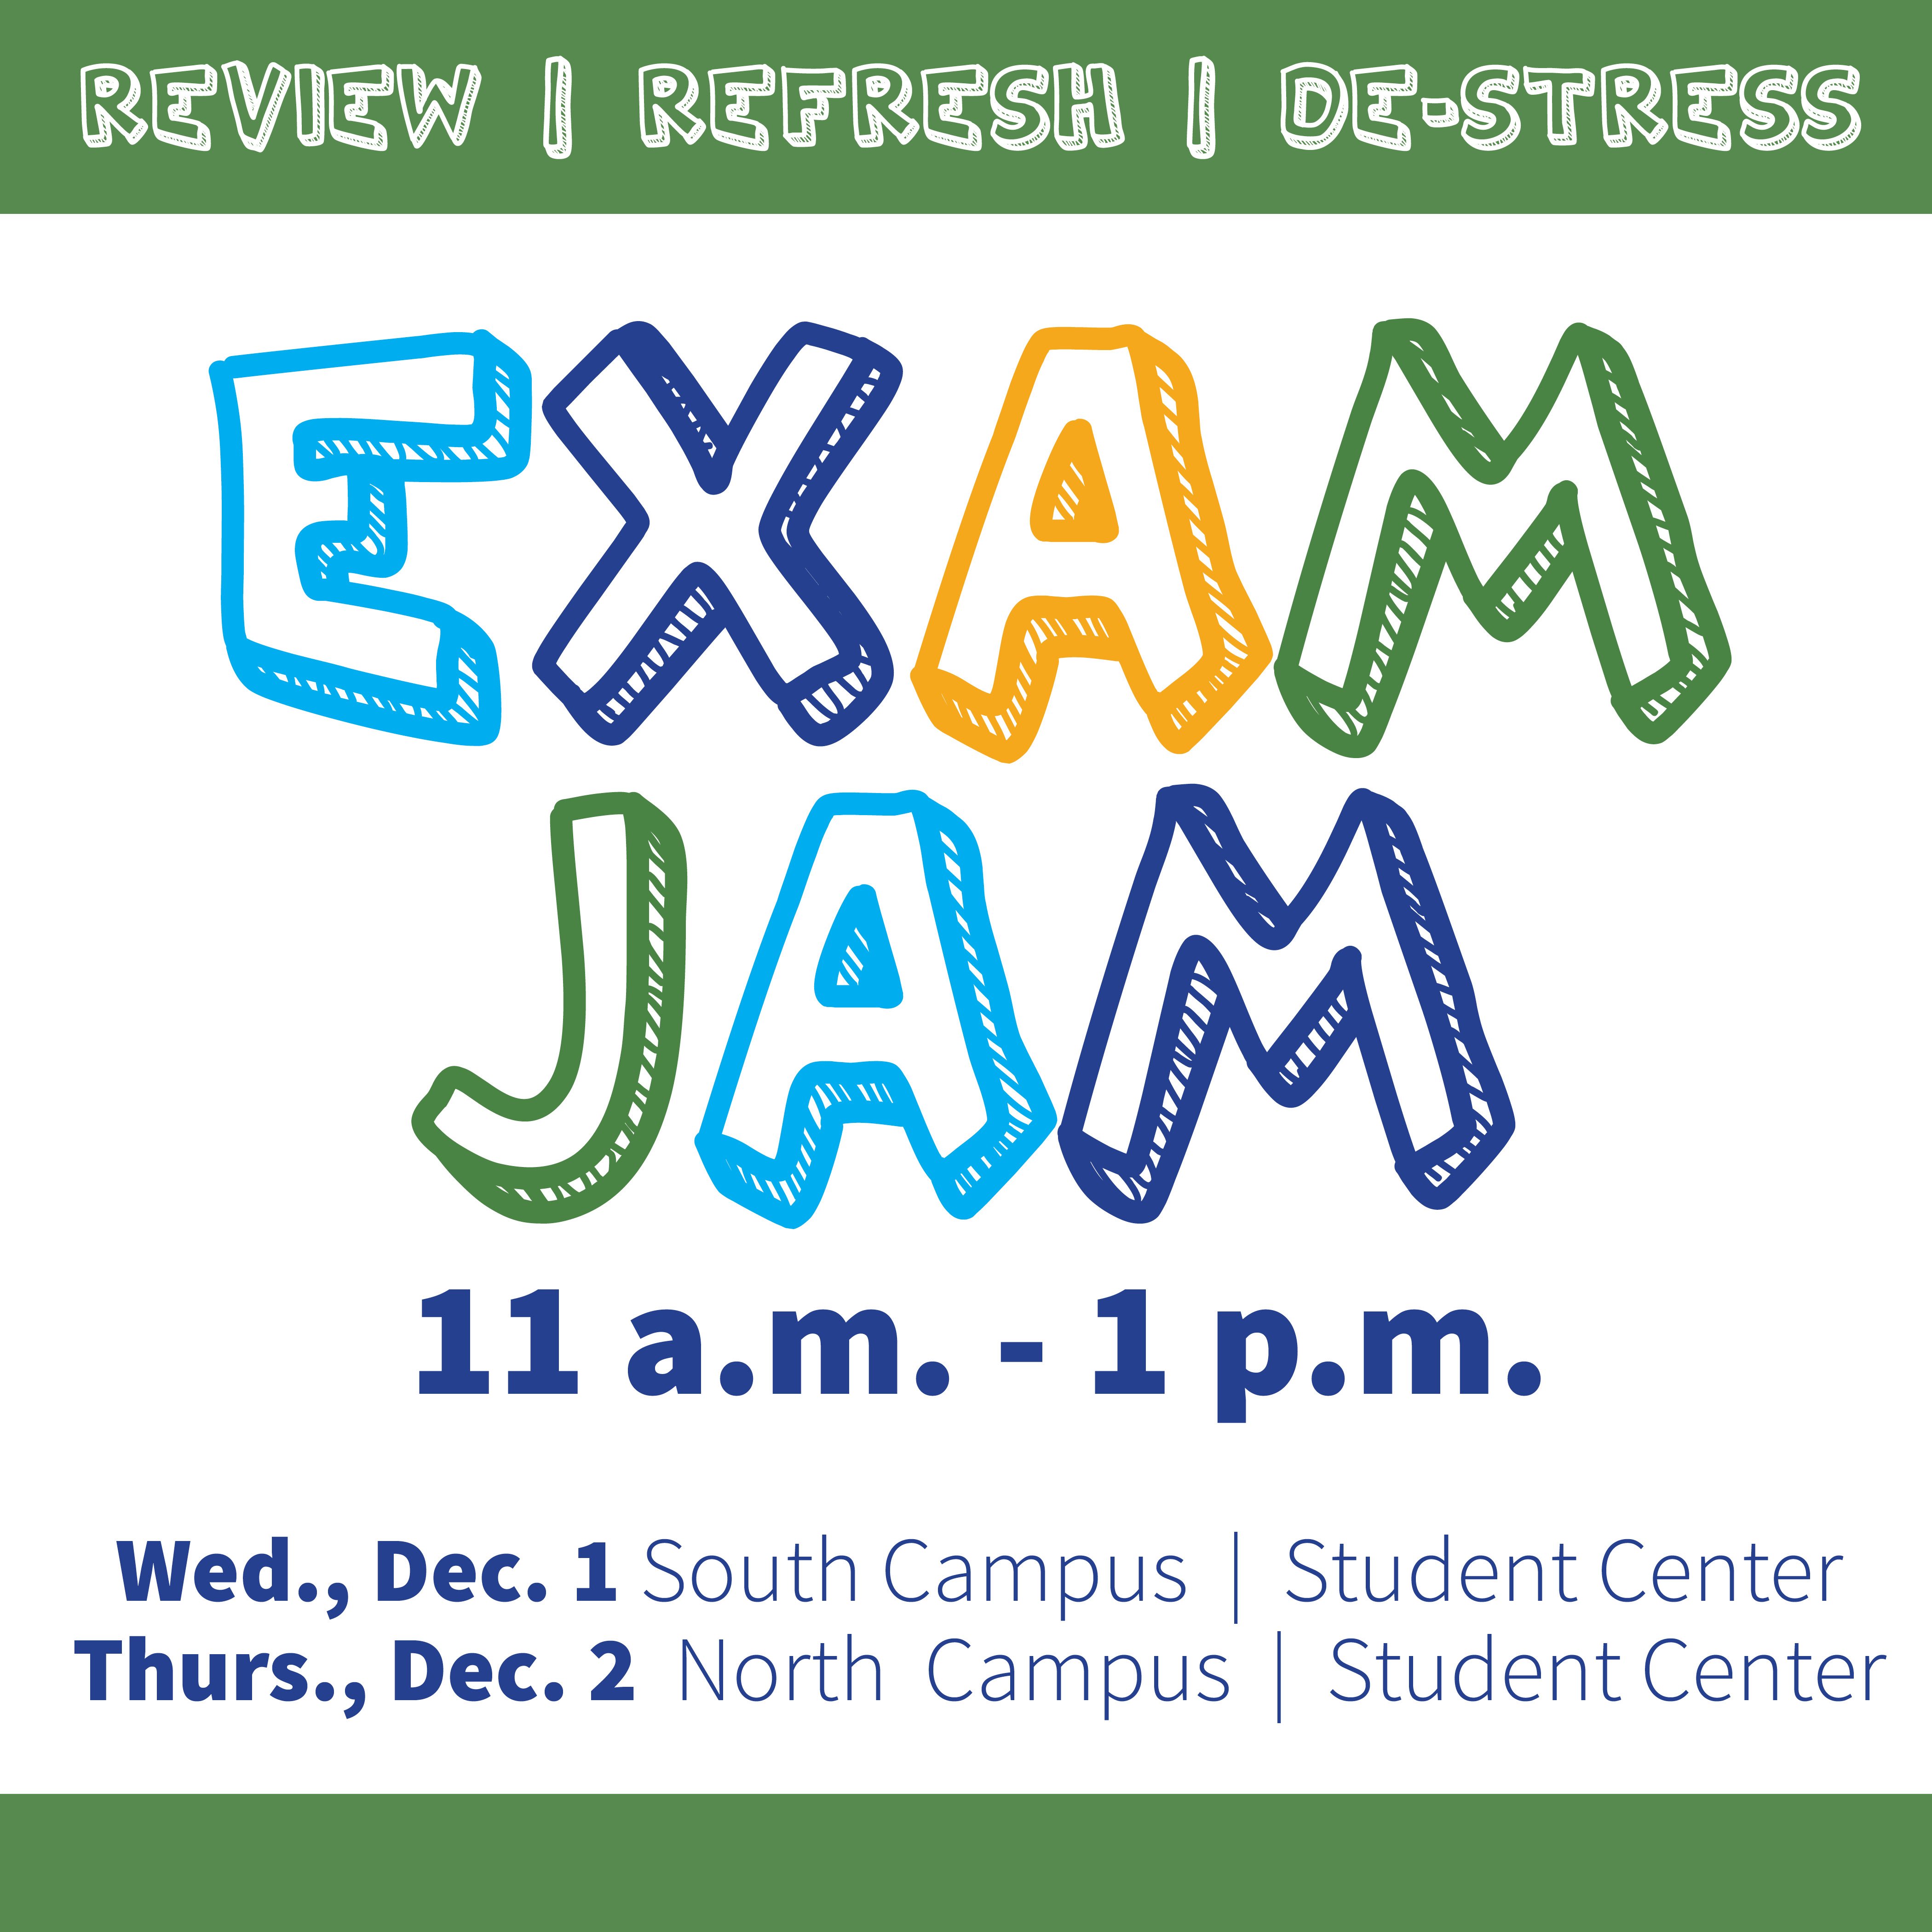 Exam Jam will take place 11 a.m. - 1 p.m. in the North and South Campus Student Centers on Wednesday December 2nd and Thursday December 3rd